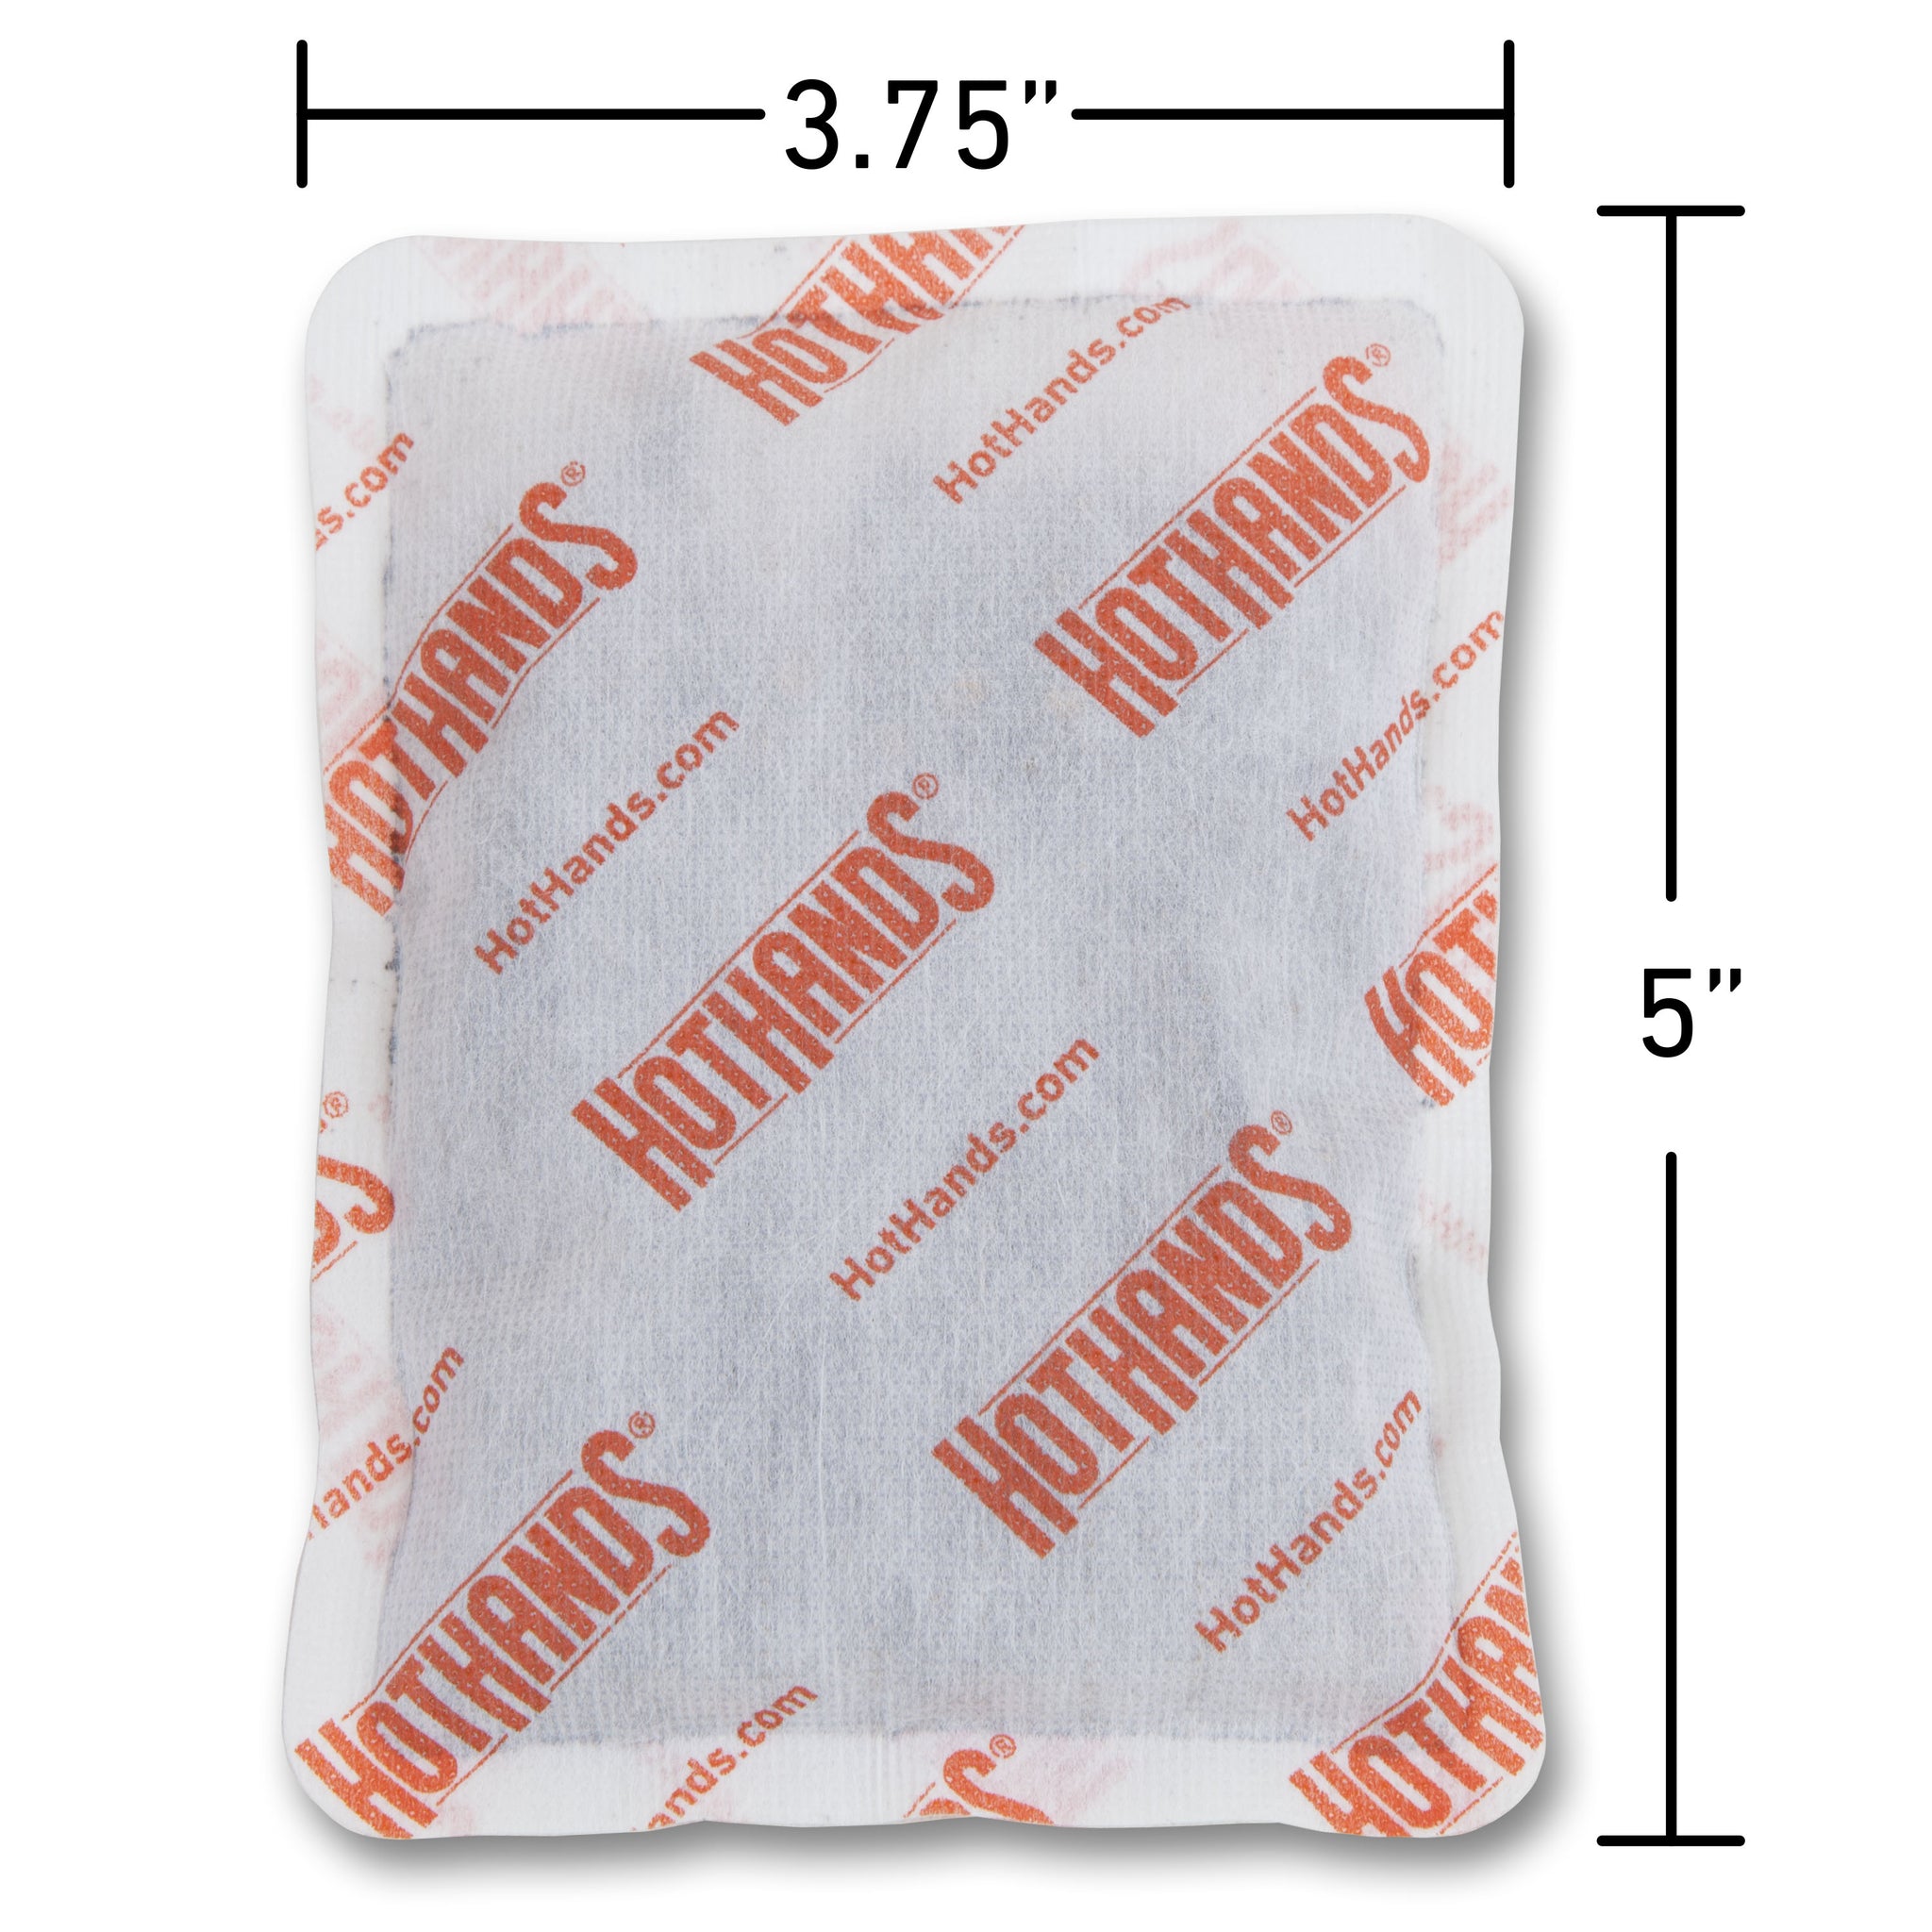 Hand Warmers: Body/Hand SUPER Warmers Box by 40 Warmers